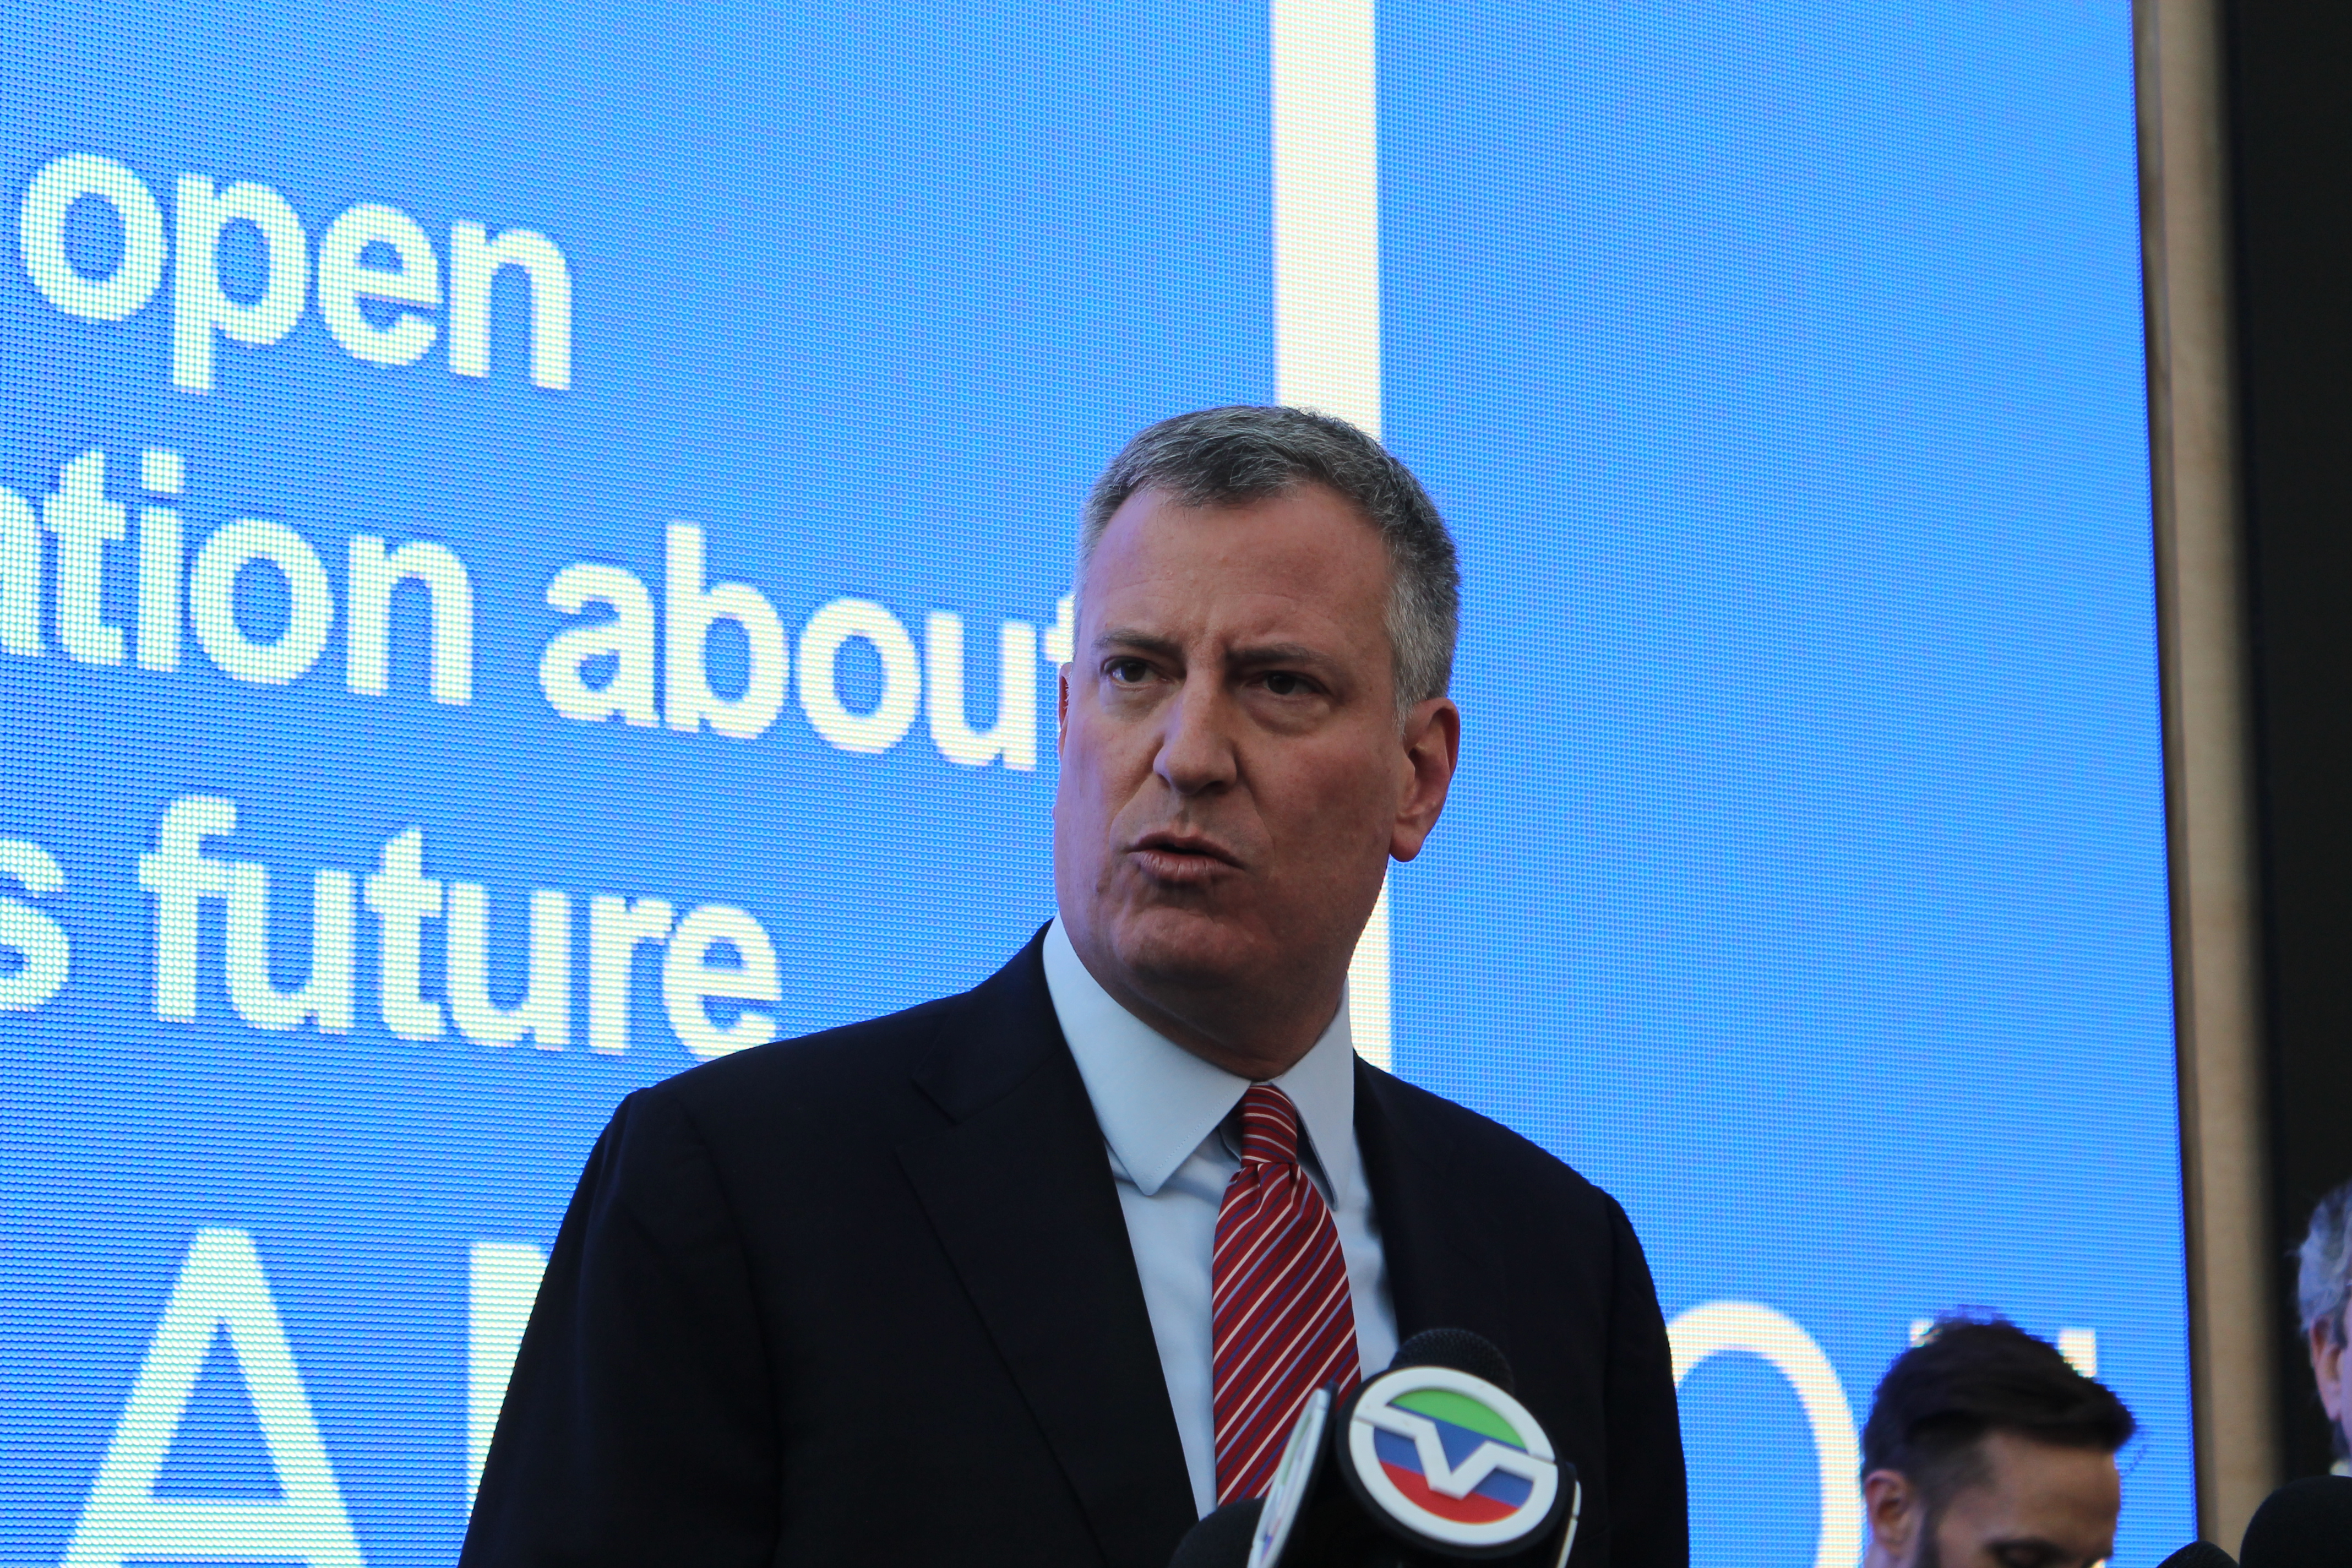 Mayor-elect Bill de Blasio came to the Talking Transition tent on Wednesday.